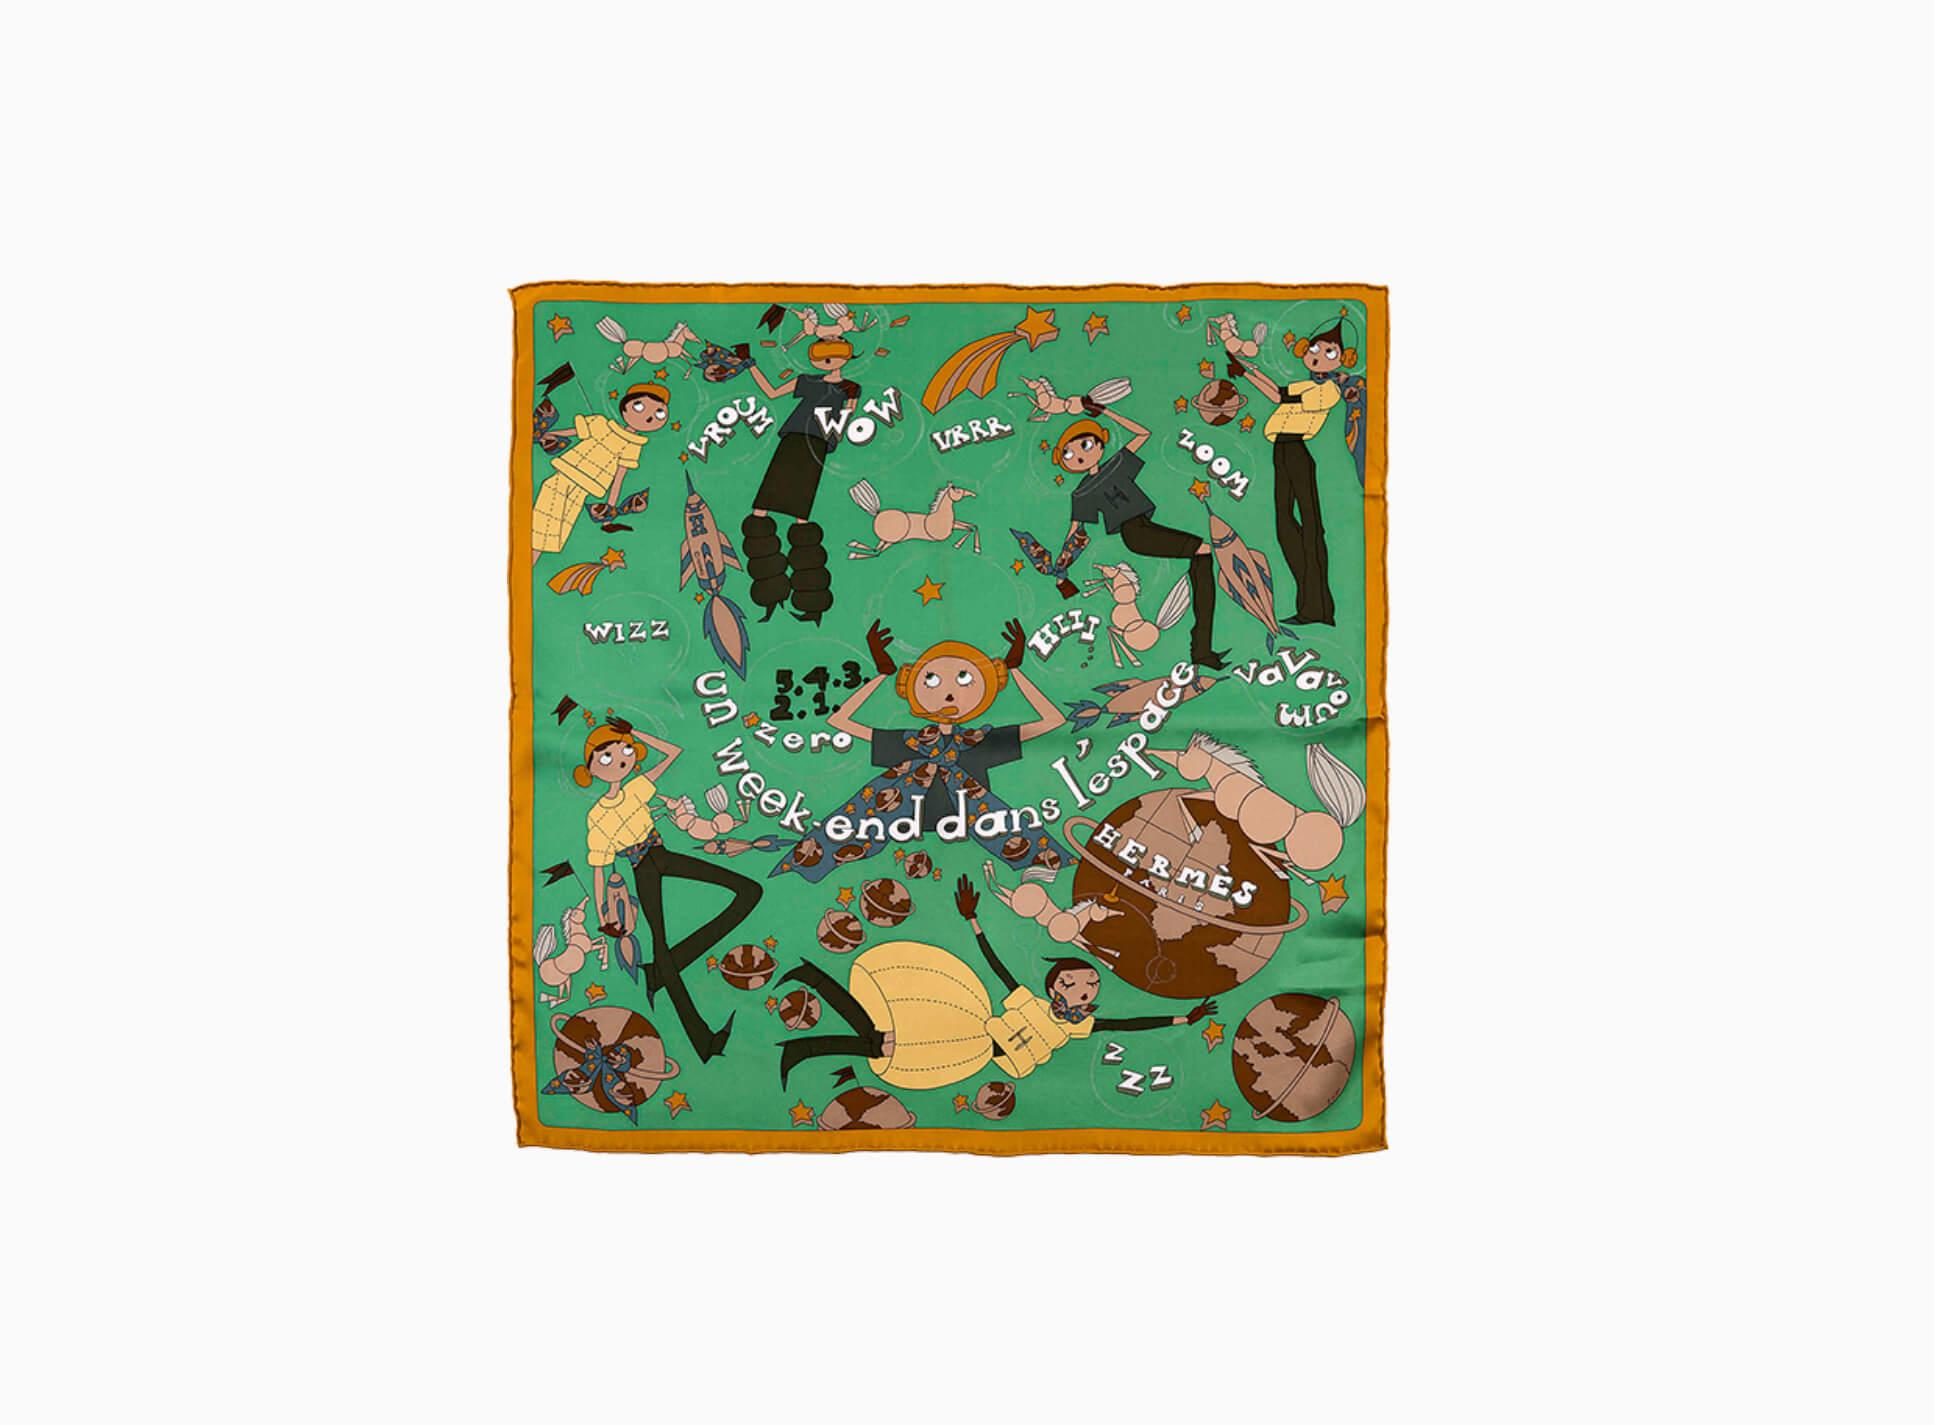 A Rare Hermes Silk Scarf 'Un weekend dans l'espace' by Saw Keng In Excellent Condition For Sale In London, GB